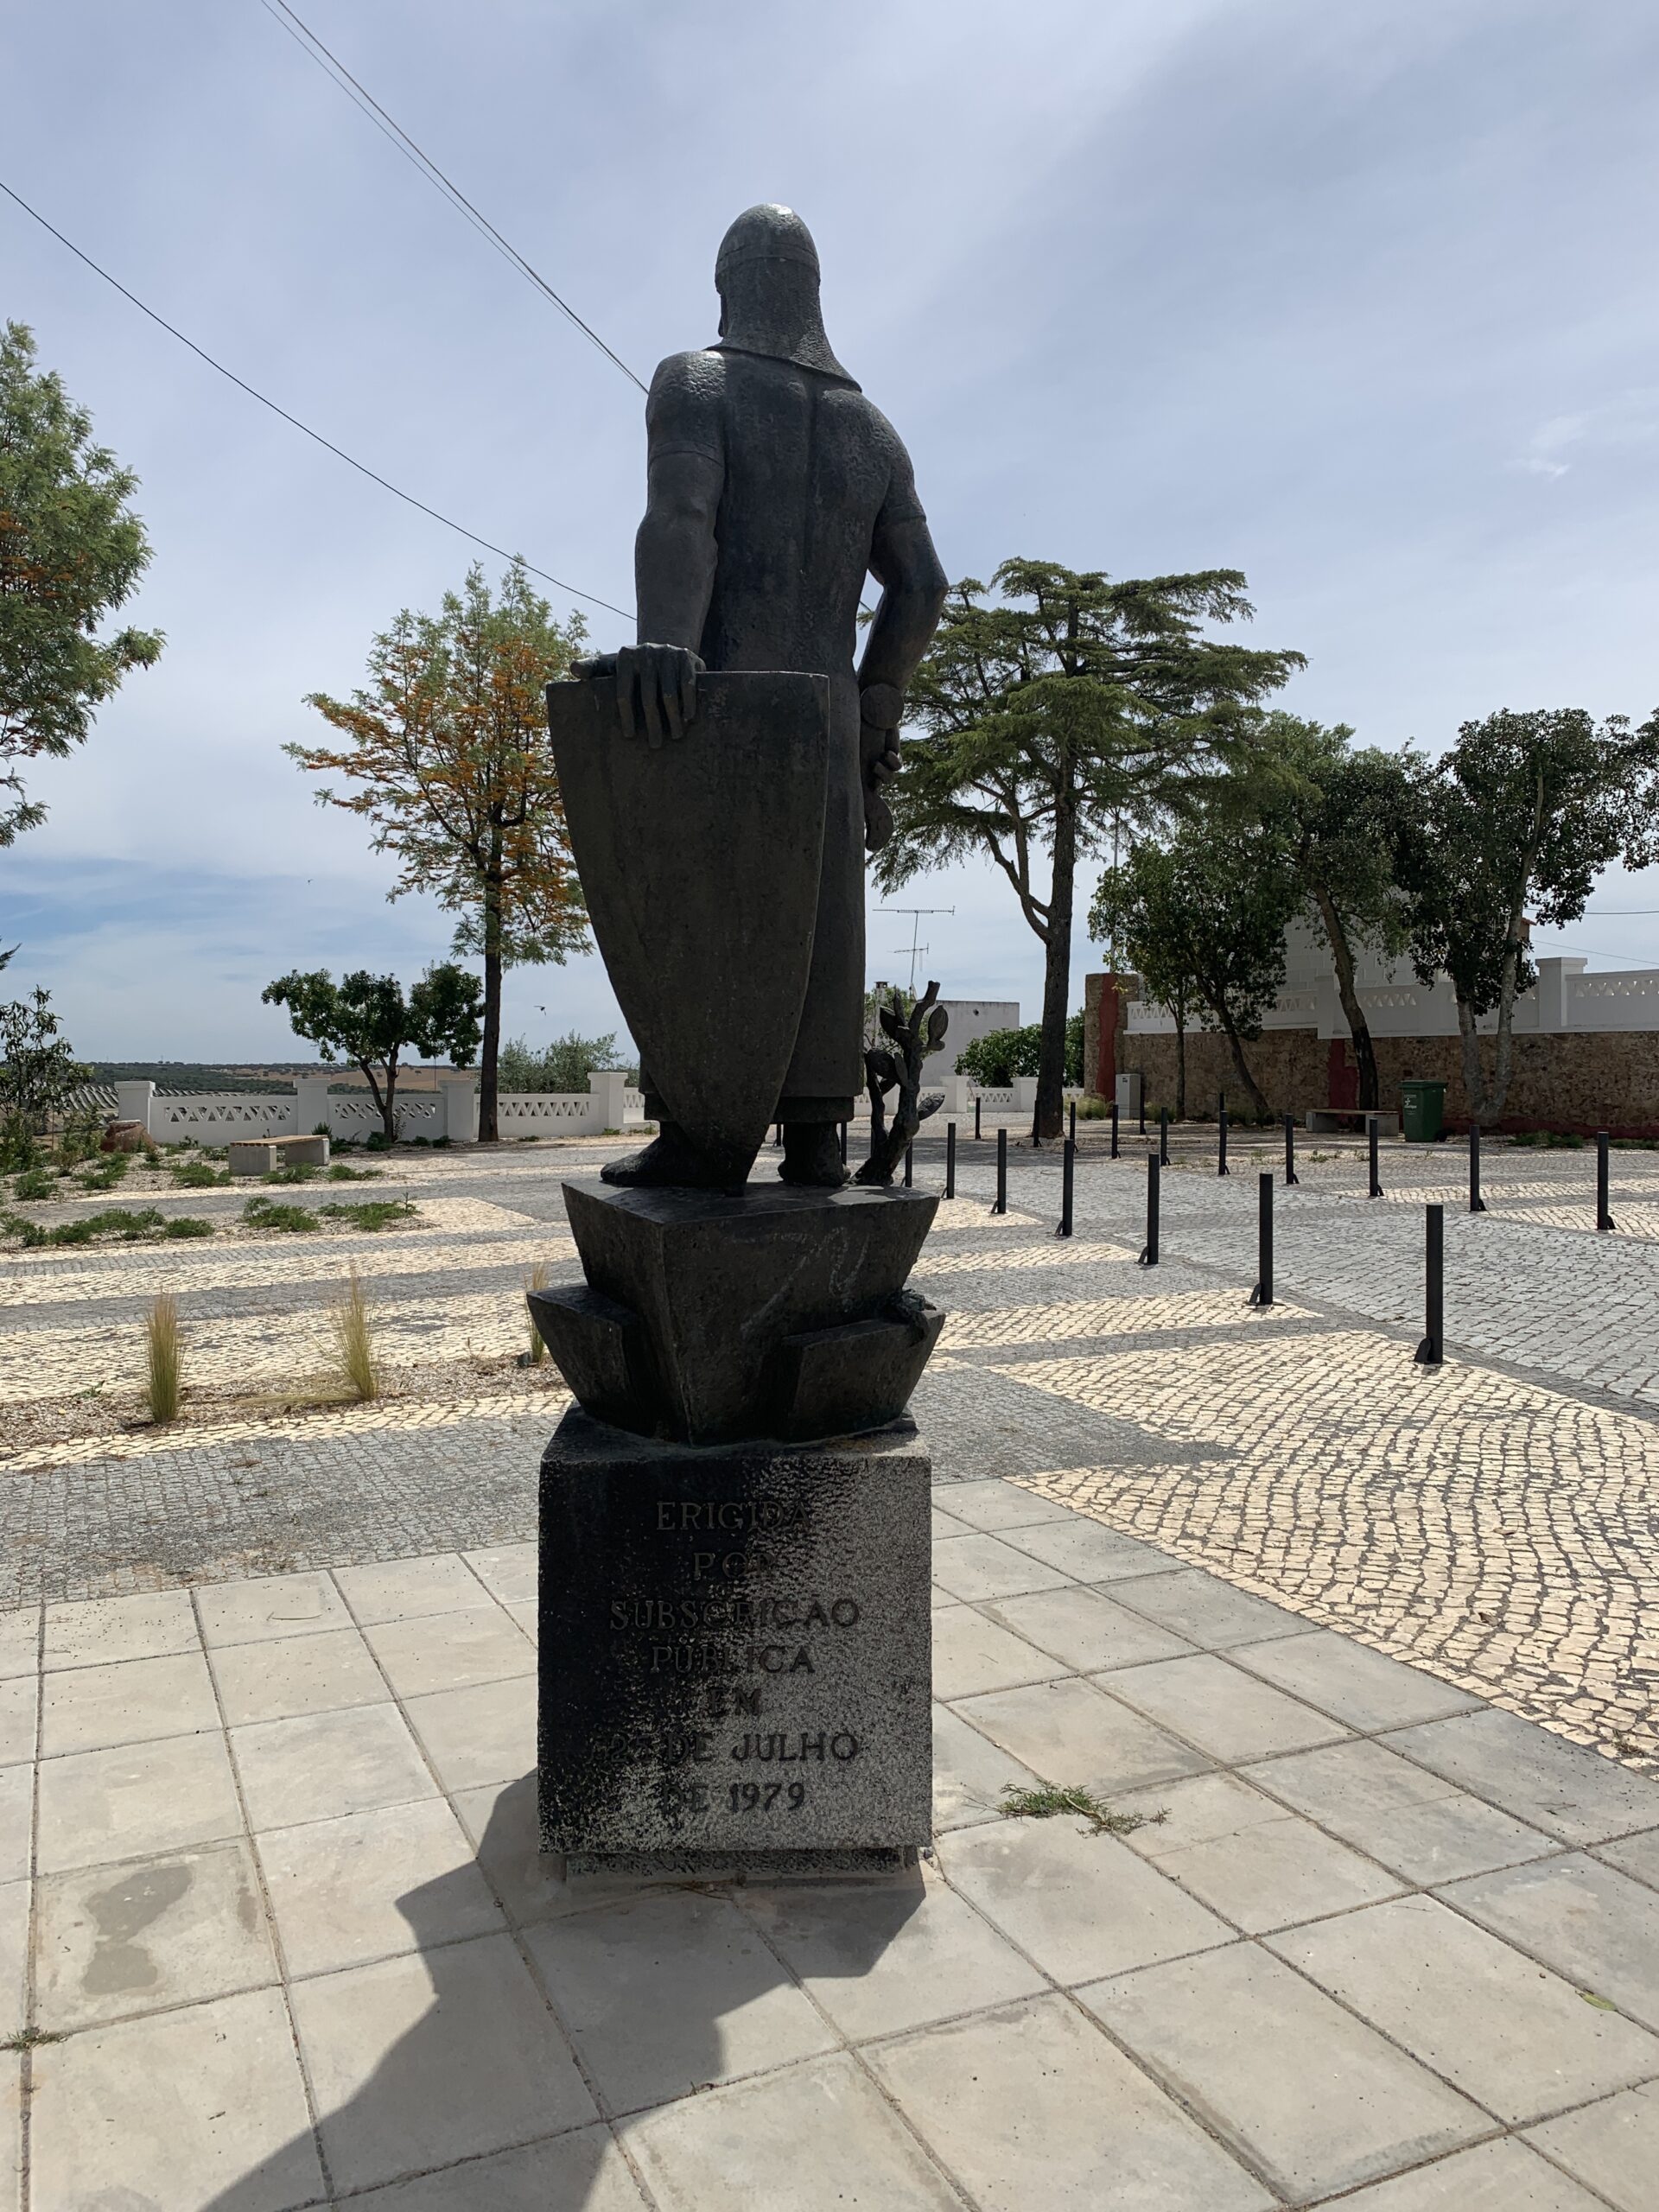 Rear view of the Afonso Henriques statue.